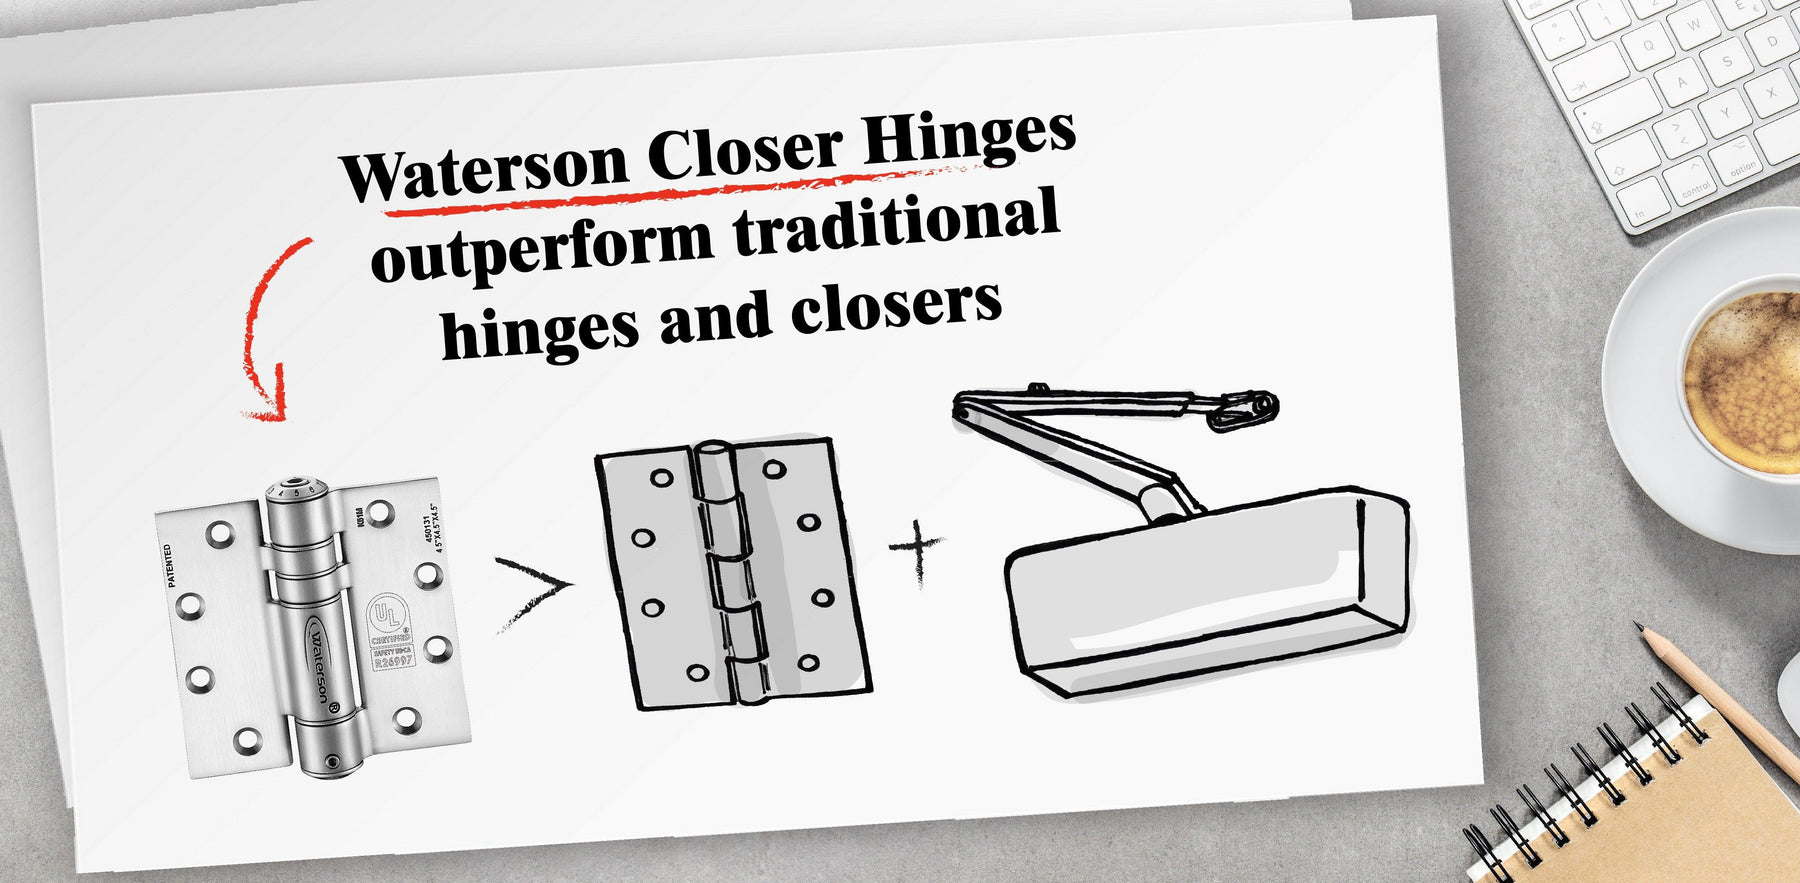 BHMA A156.17 Money Saving Single Acting Closer Hinges - Waterson Multi-function Closer Hinge